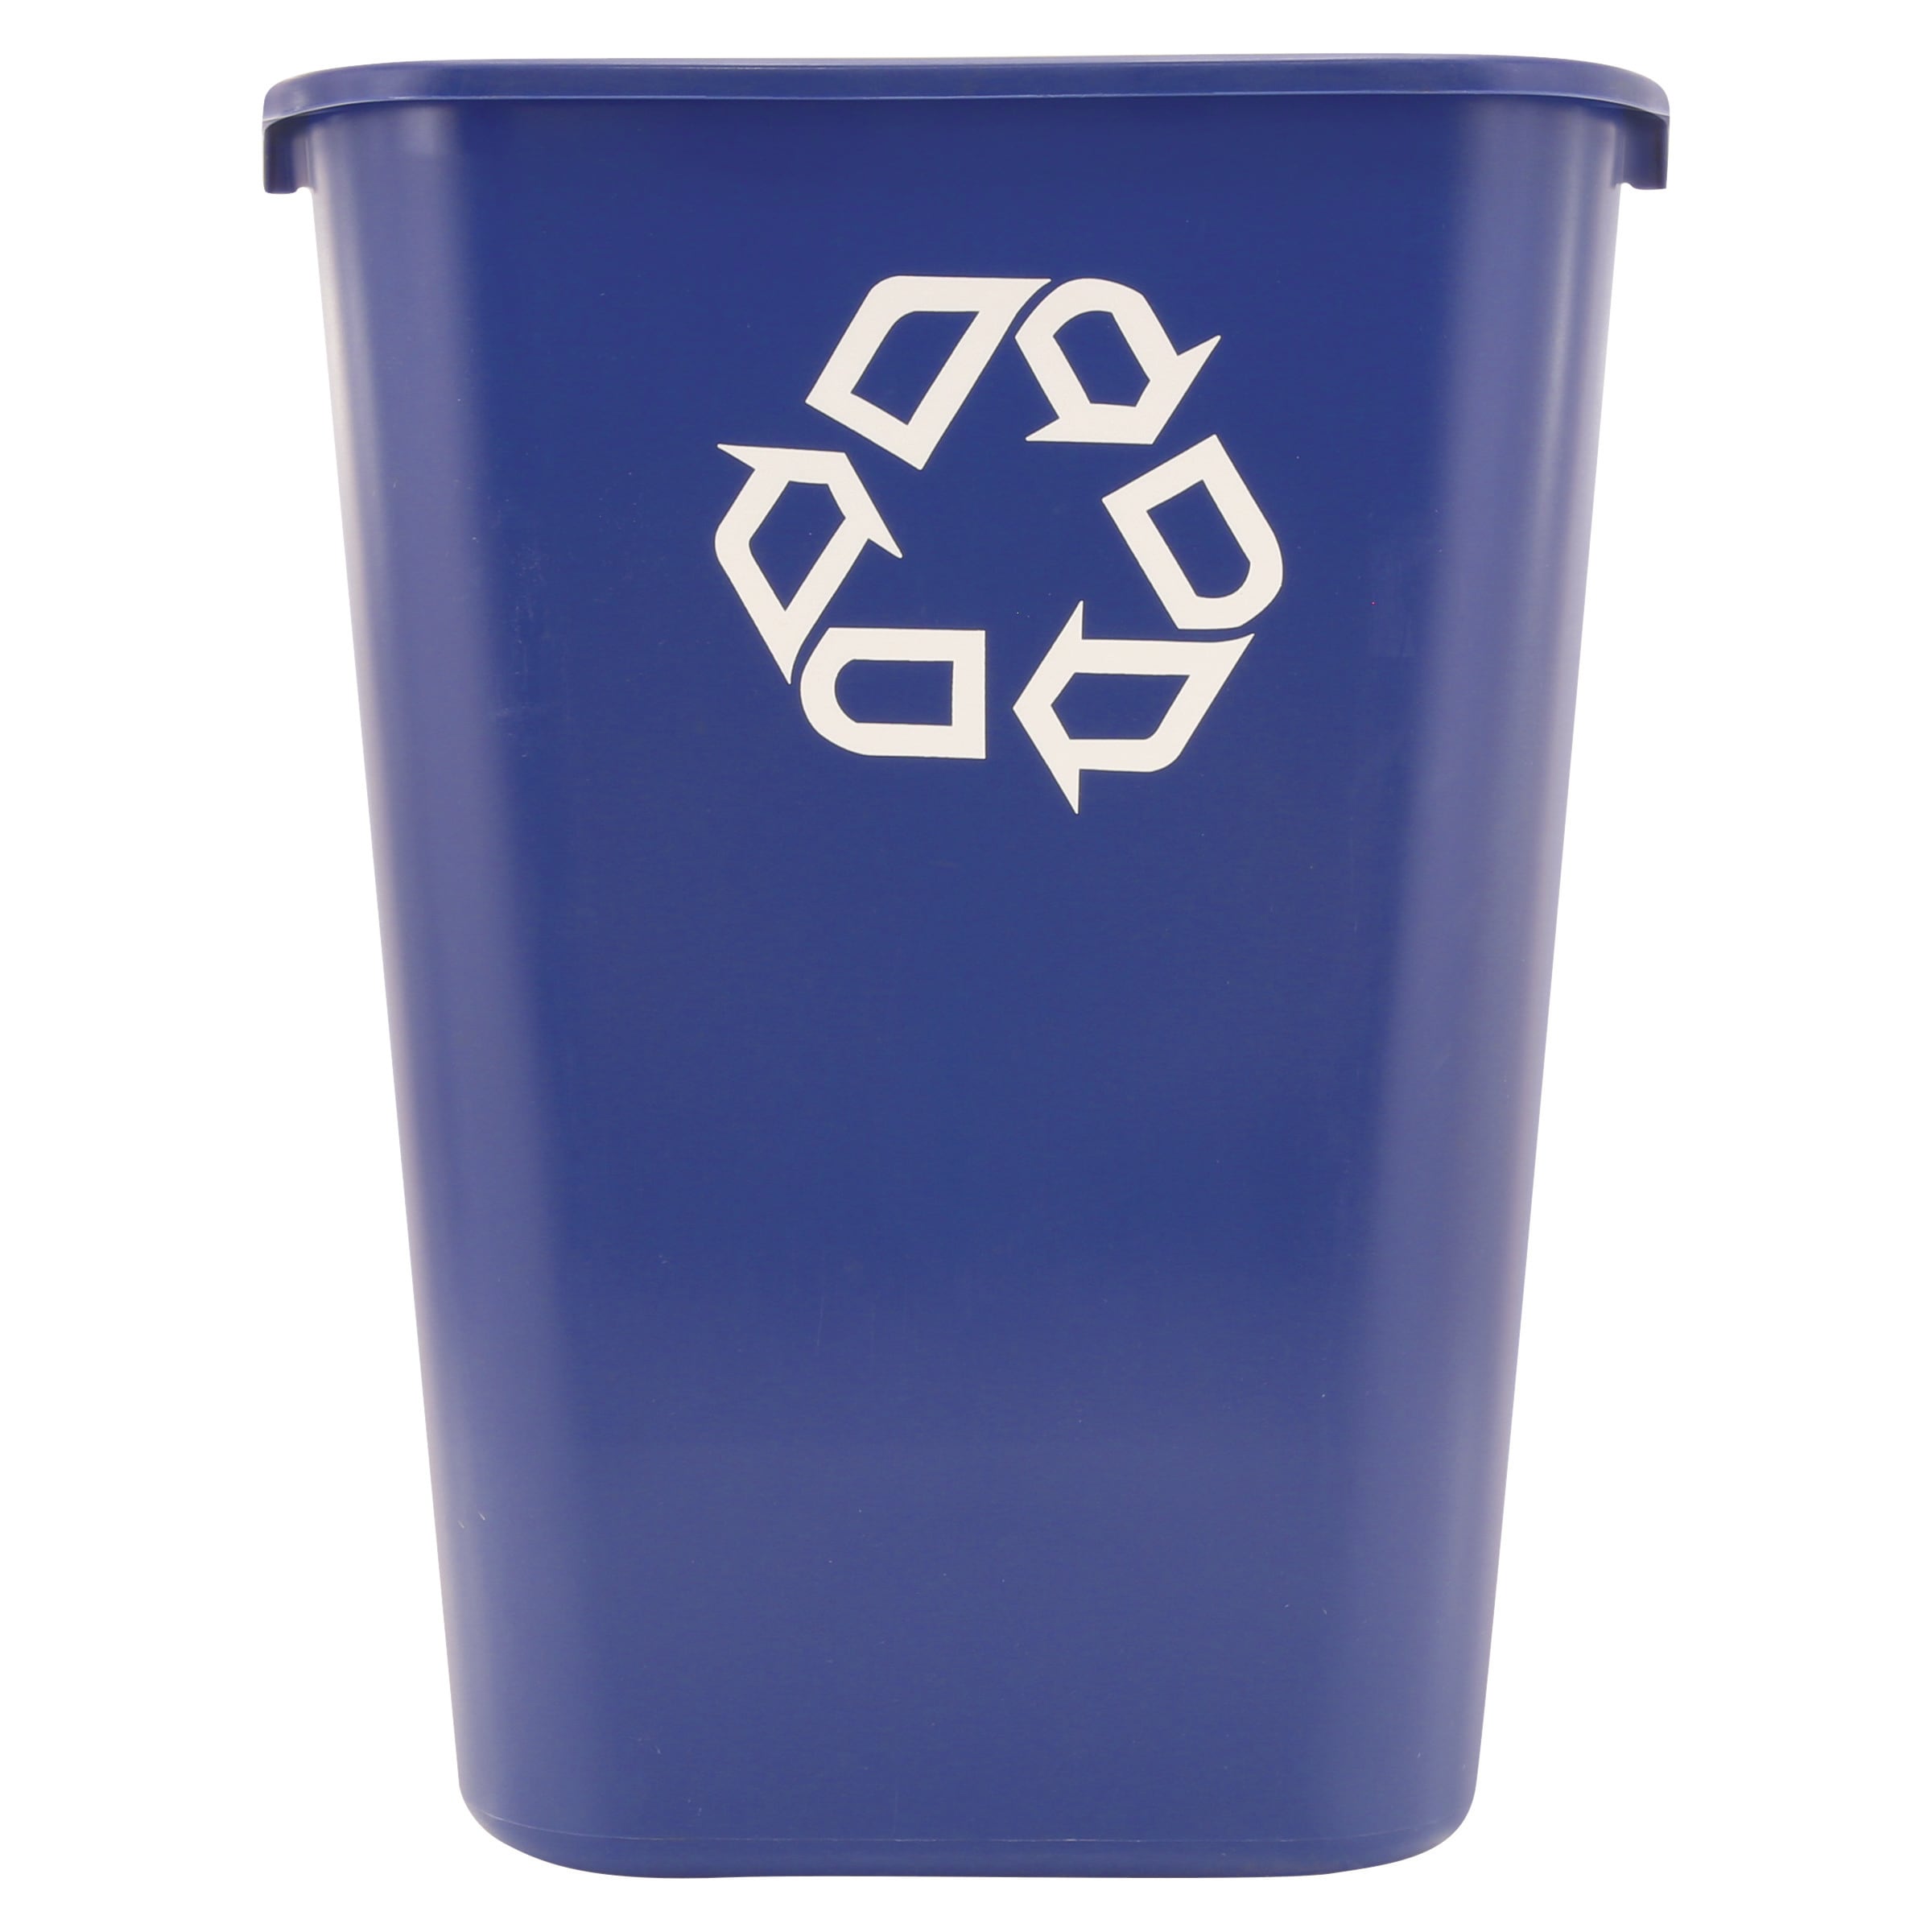 Waste Blue Garbage Bag Plastic With Concept The Color Of Blue